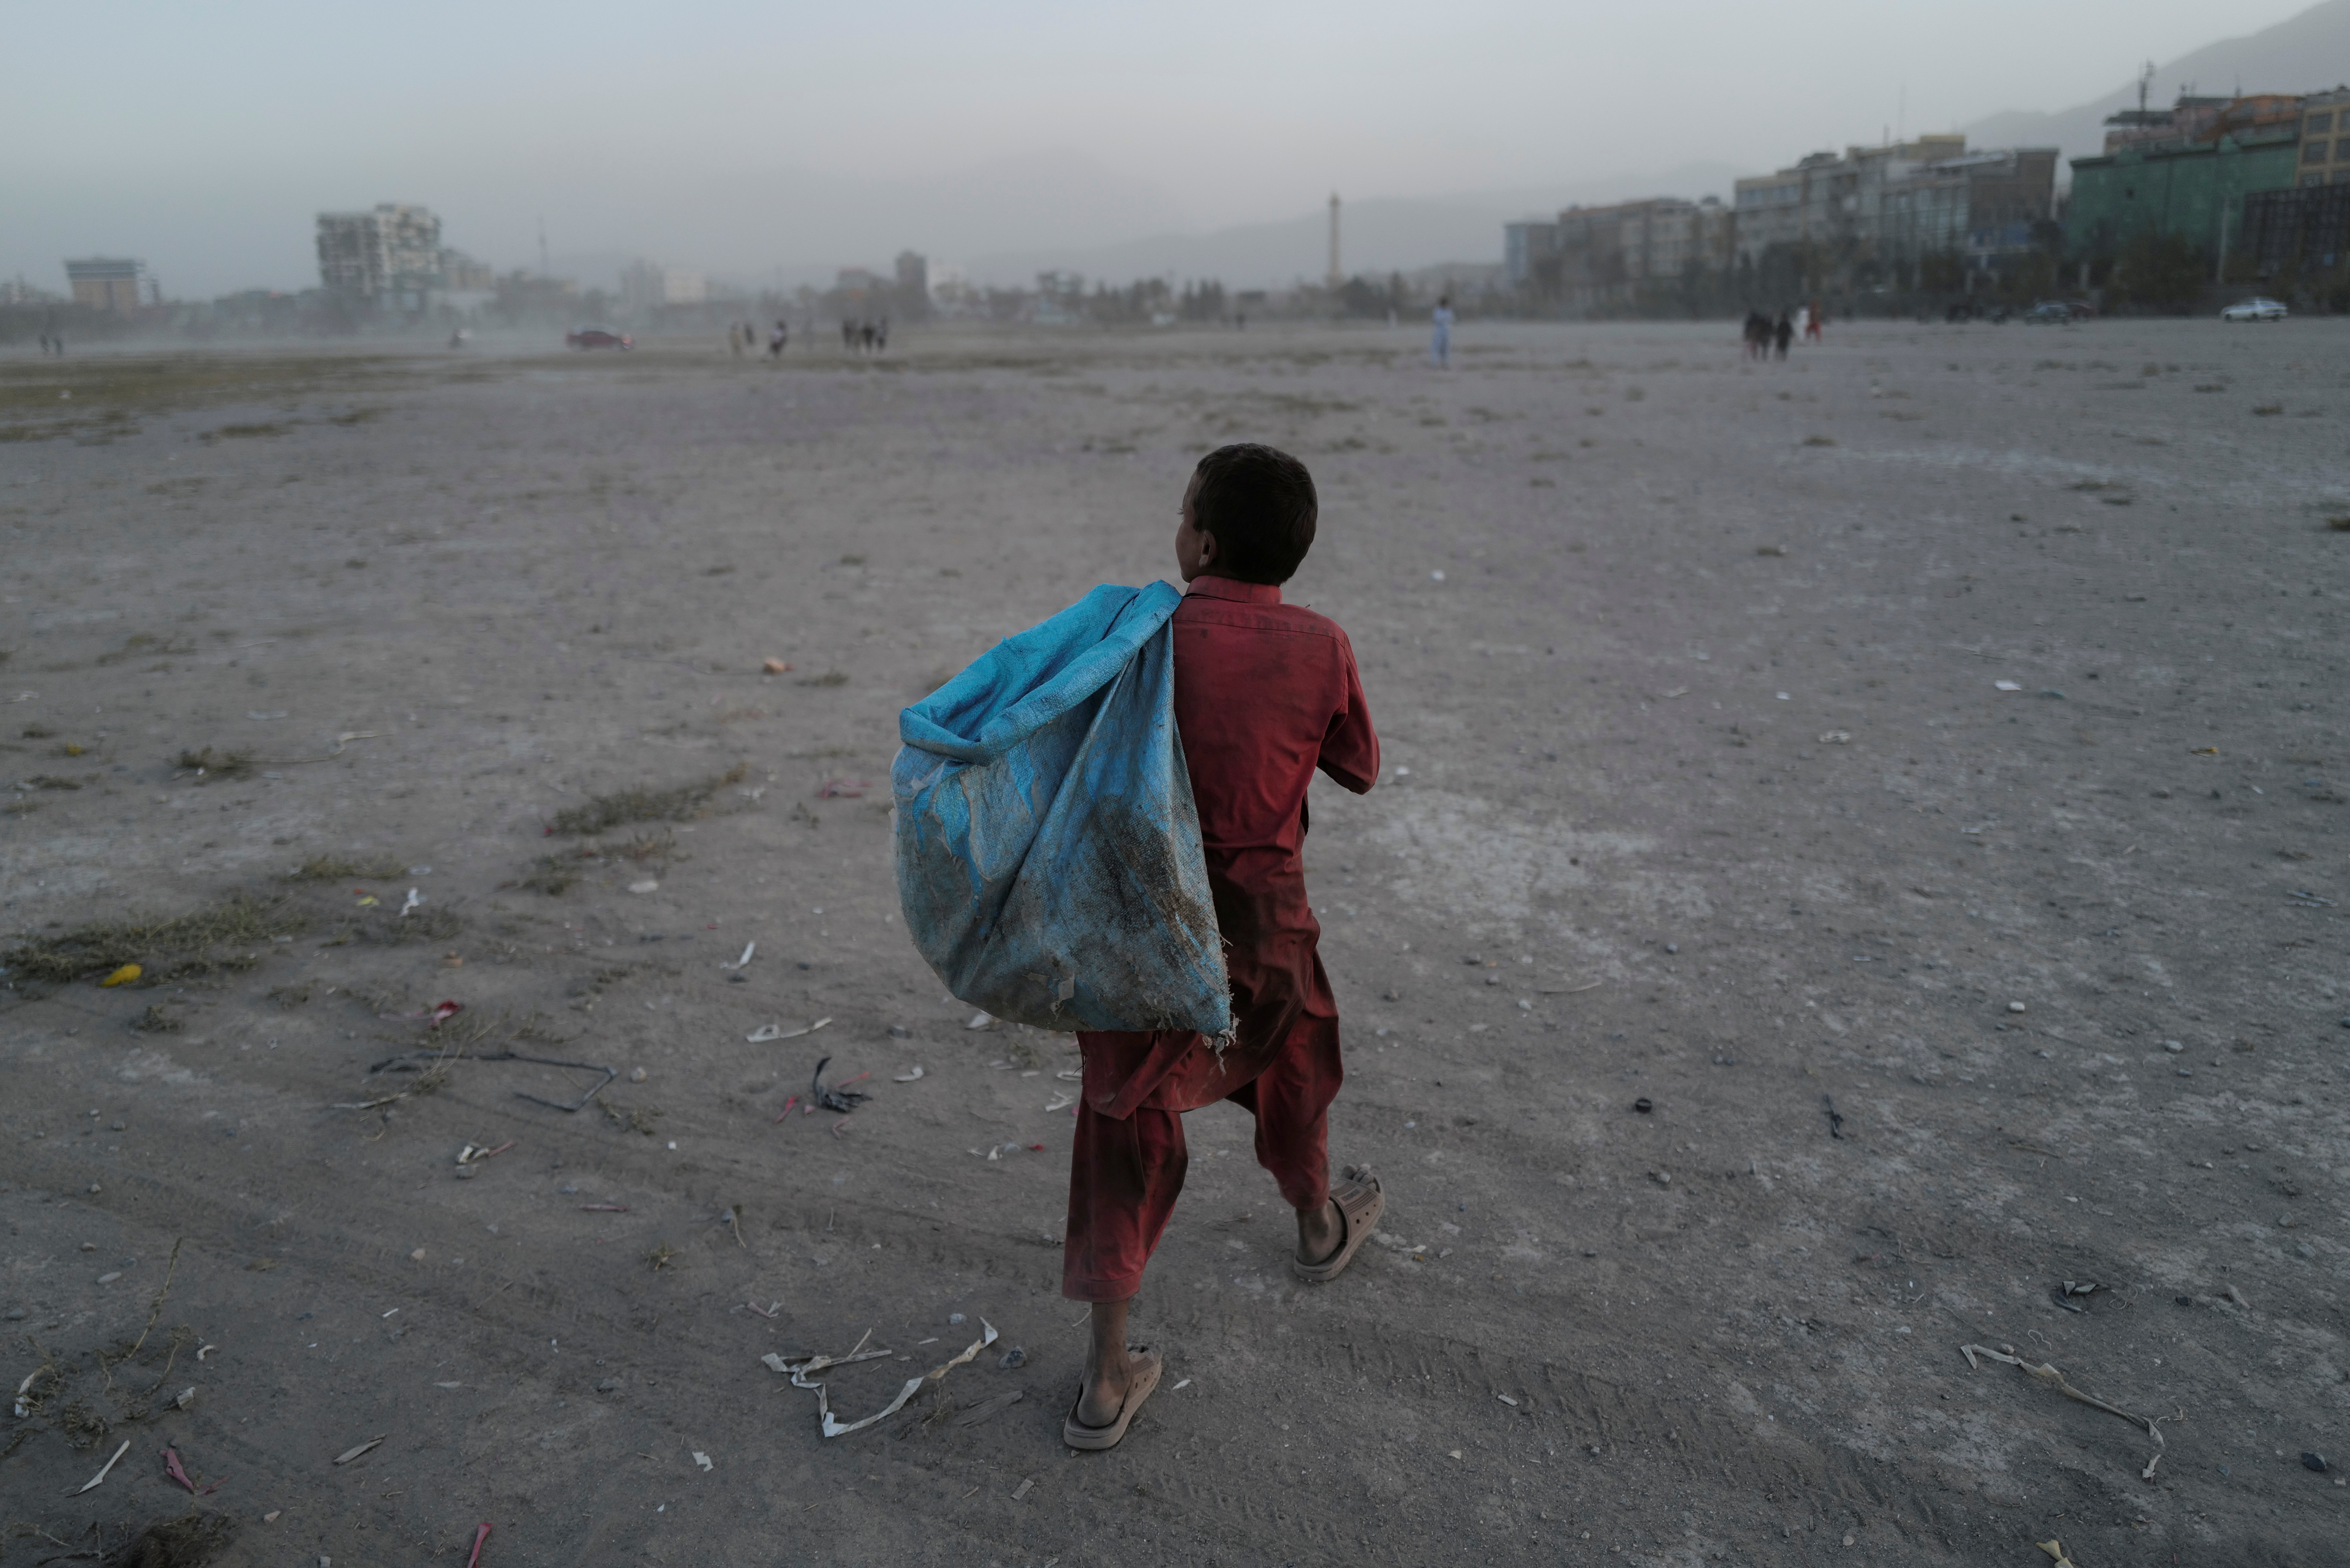 Eftekhar, 14, carries a bag filled with plastic bottles he collected, to be sold, as he walks in a playground in Kabul, Afghanistan, October 22, 2021. REUTERS/Zohra Bensemra